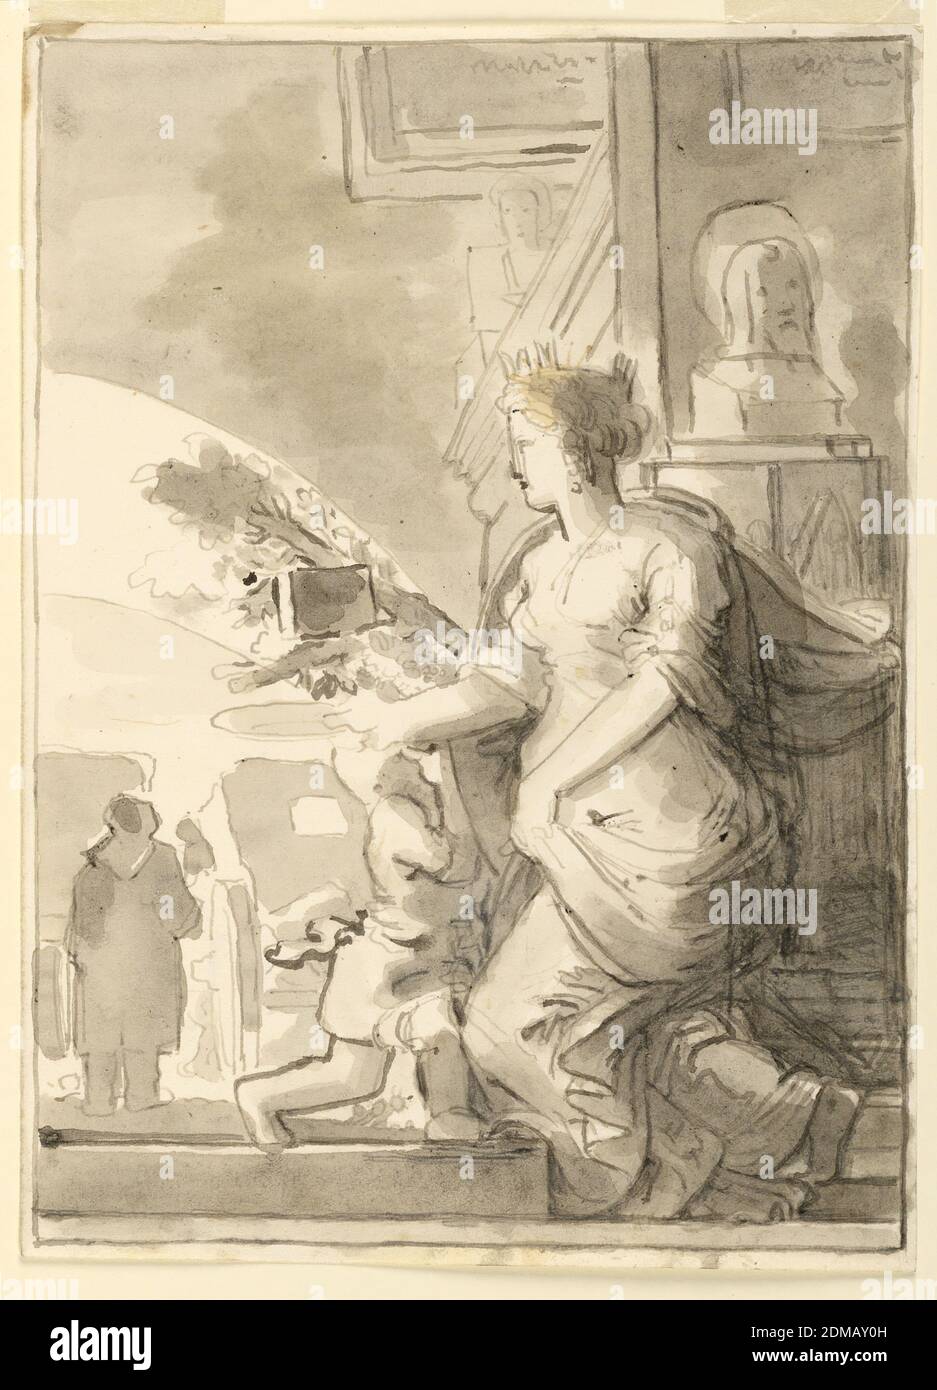 Sketch, Allegory in Architectural Setting with Sculpted Bust, Fortunato Duranti, Italian, 1787 - 1863, Pen and ink, brush and sepia wash on paper, Sketch, Allegory in Architectural Setting with Sculpted Bust, Rome, Italy, 1820–1850, Drawing Stock Photo